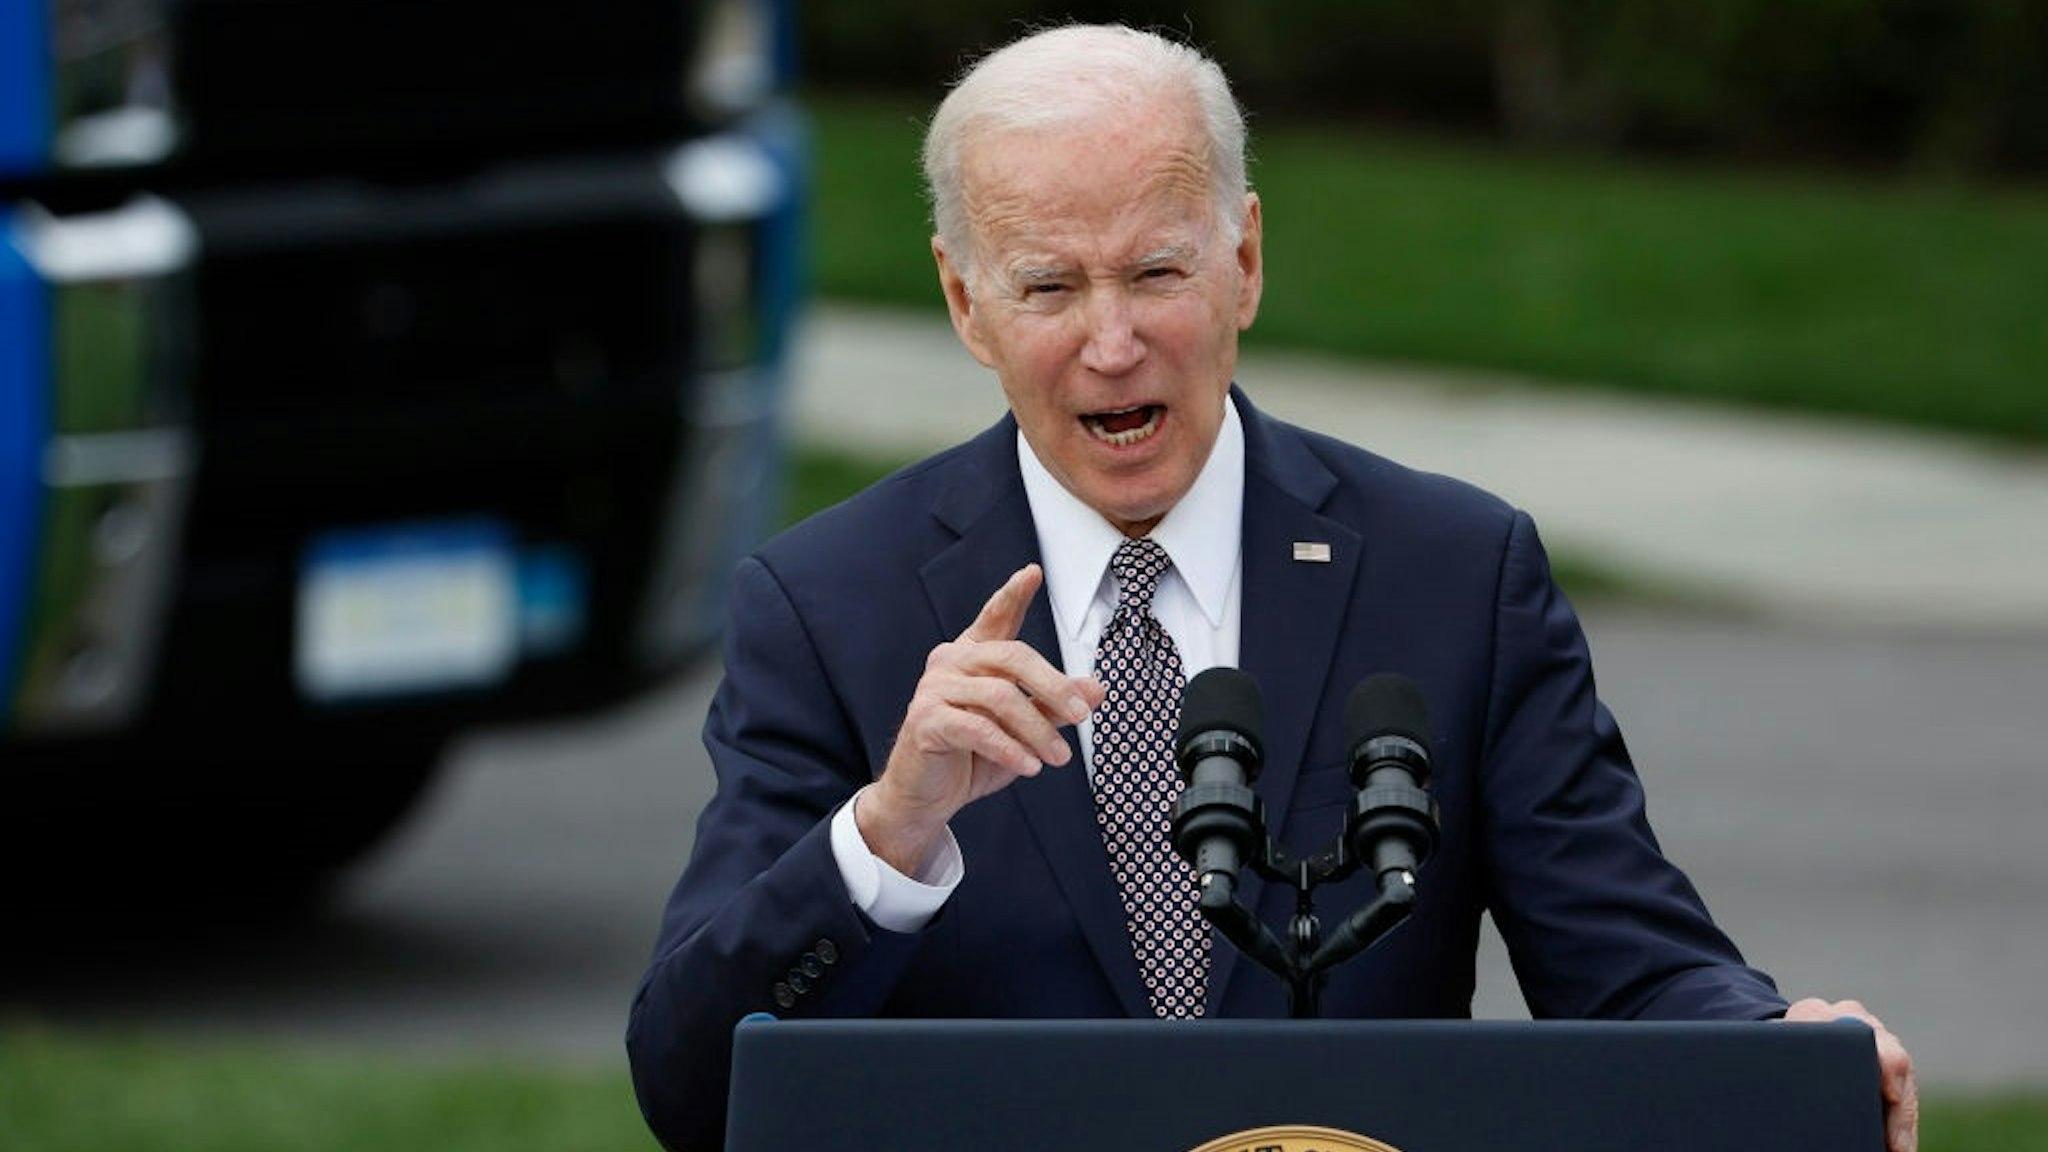 WASHINGTON, DC - APRIL 04: U.S. President Joe Biden delivers remarks on his 'Trucking Action Plan' on the South Lawn of the White House on April 04, 2022 in Washington, DC.